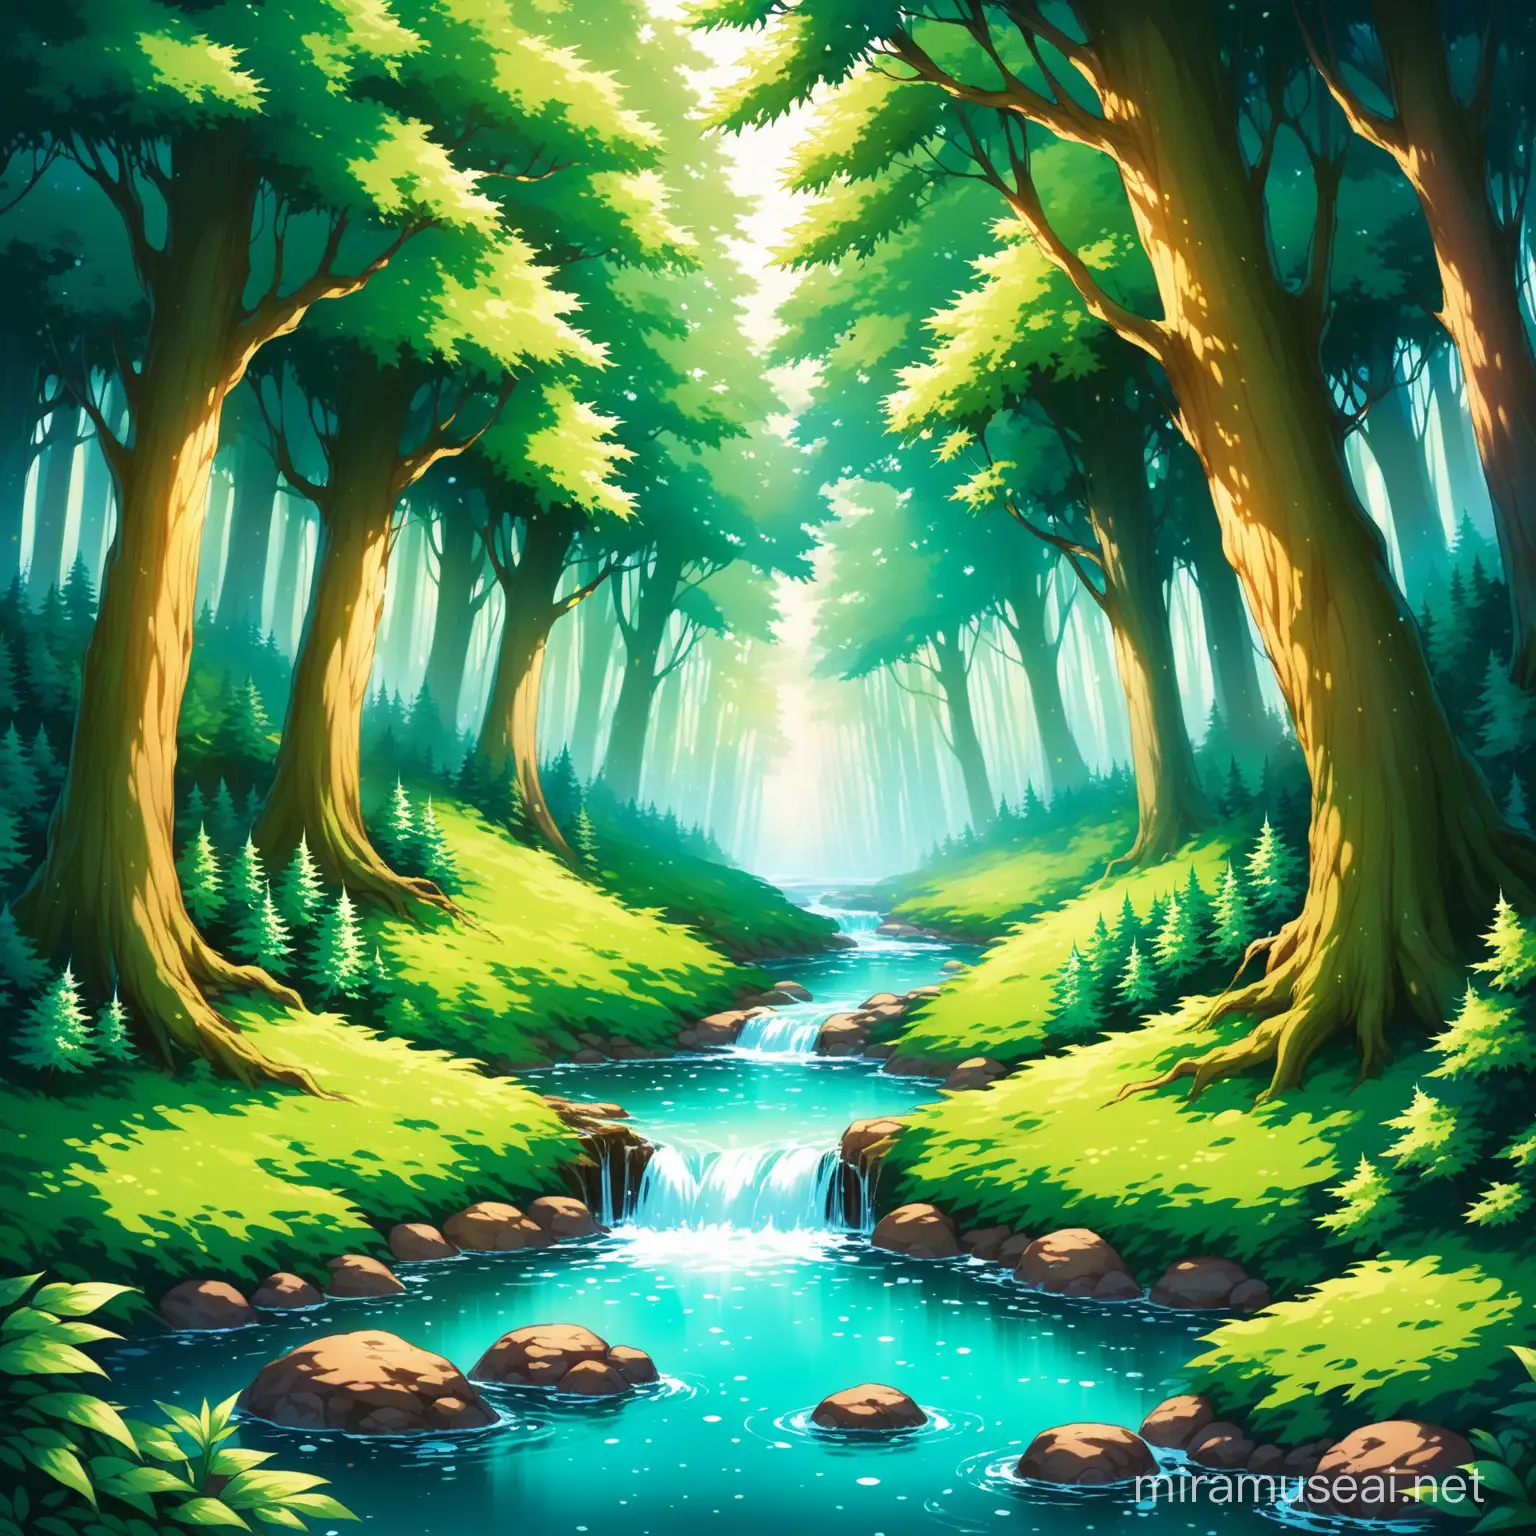 a mystical, magical fairy forest with a creek running through it. It is full of evergreen trees